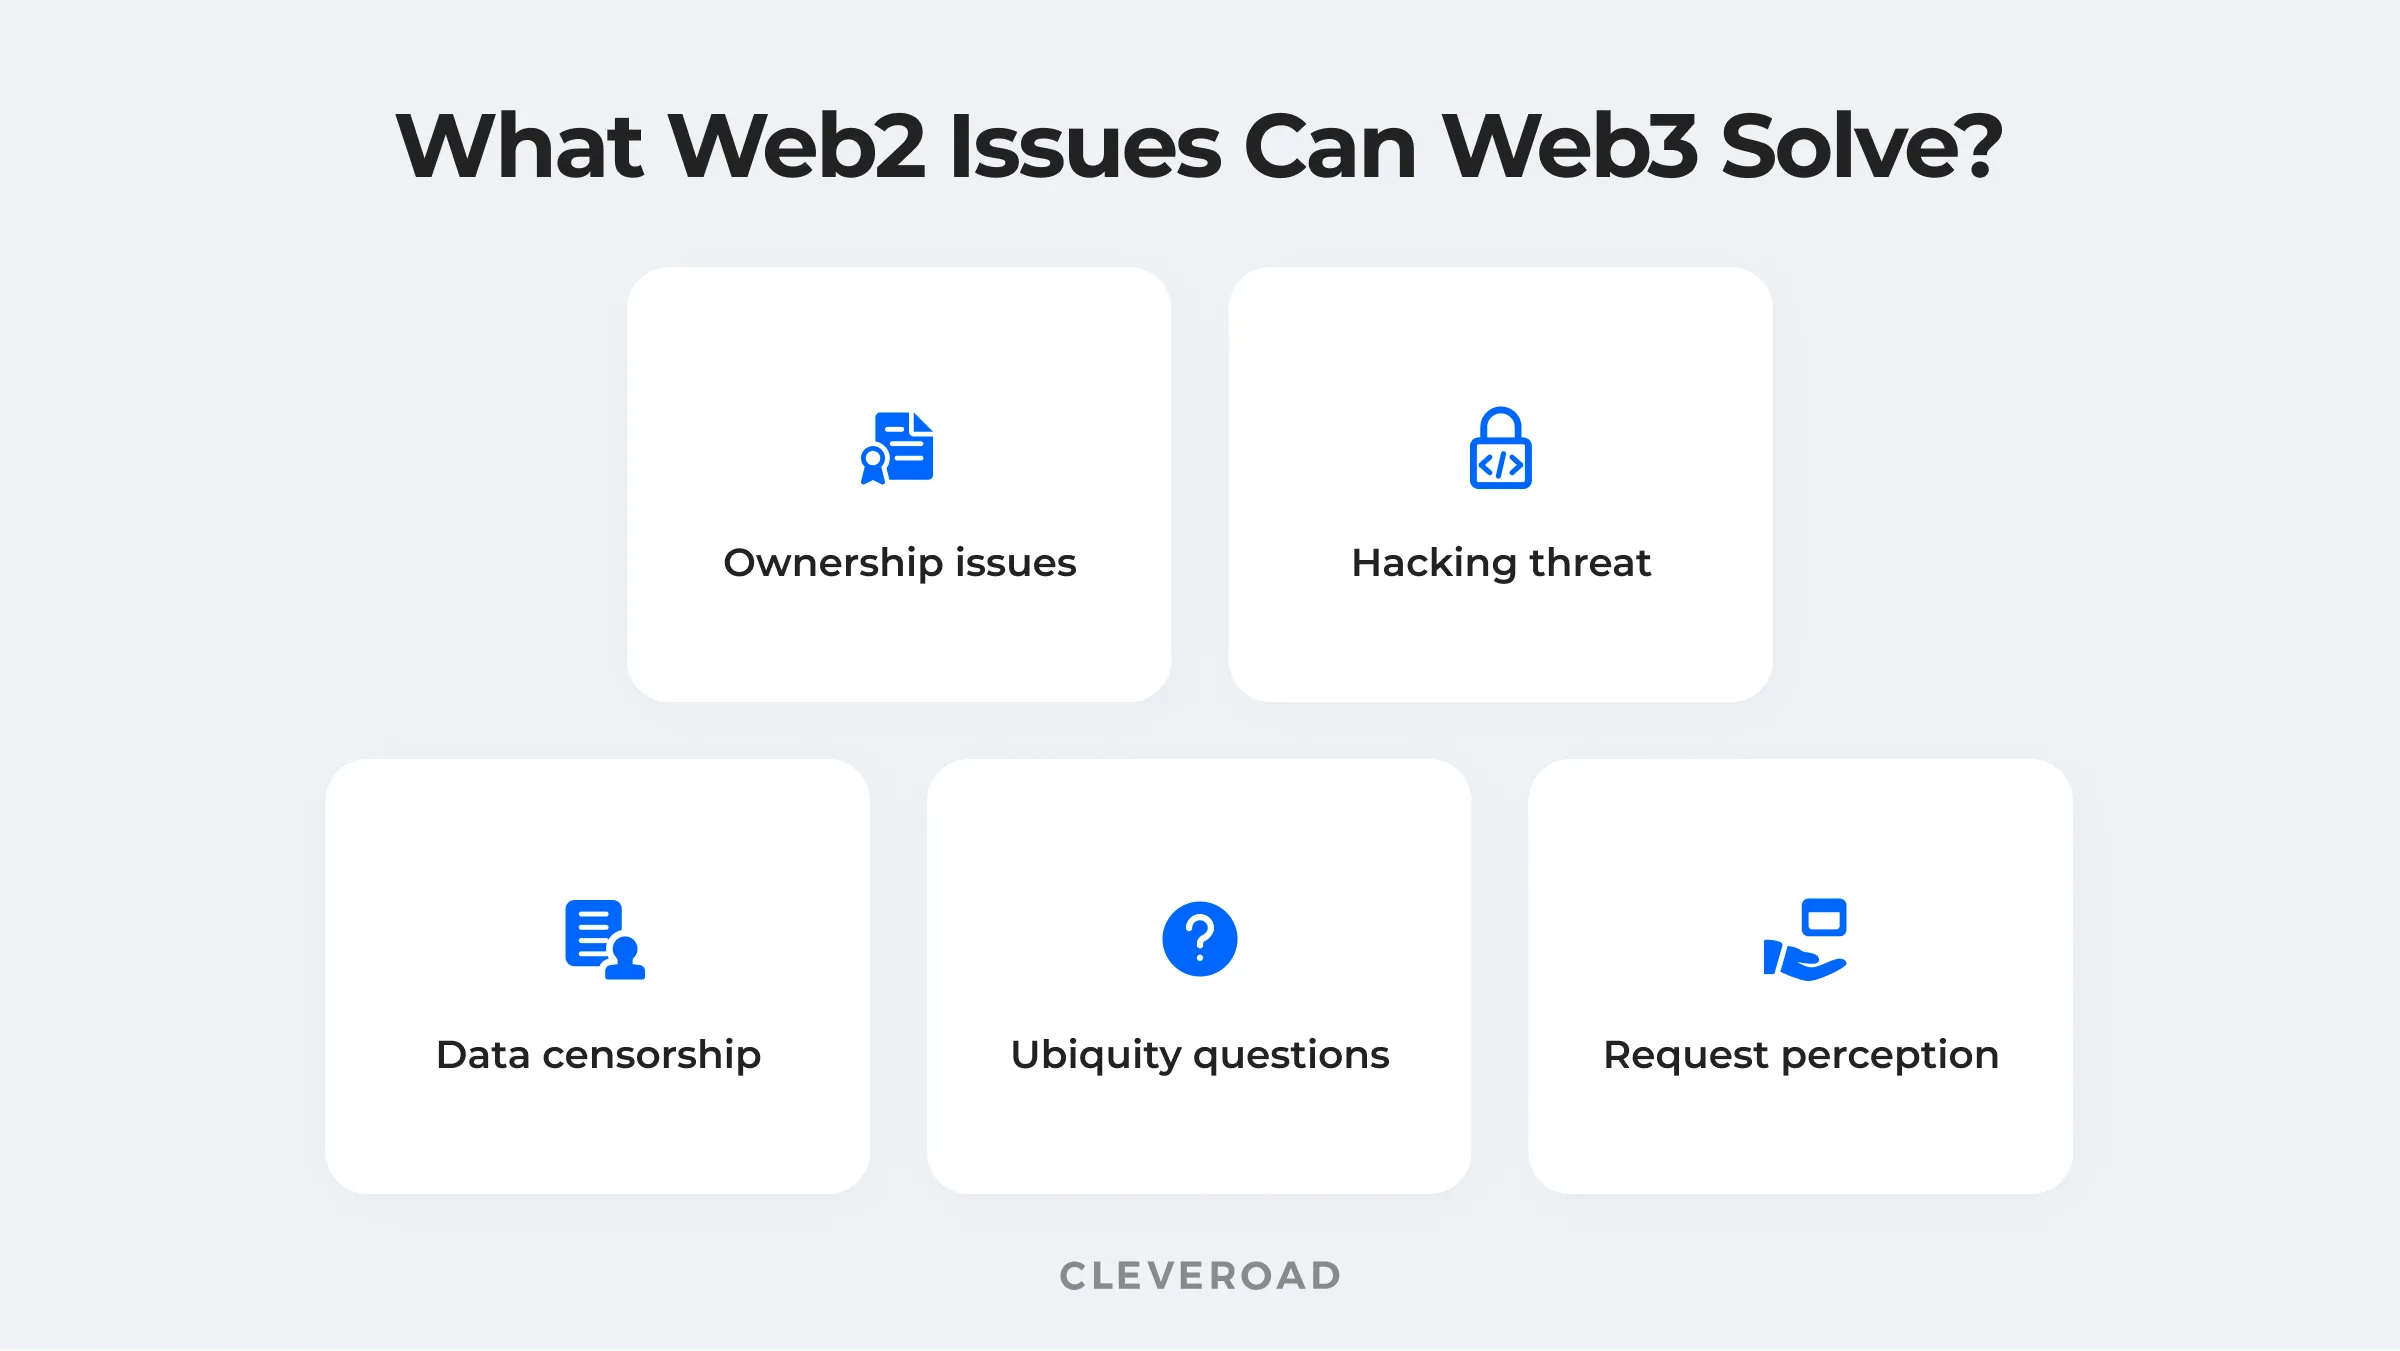 Web2 issues to solve by Web3